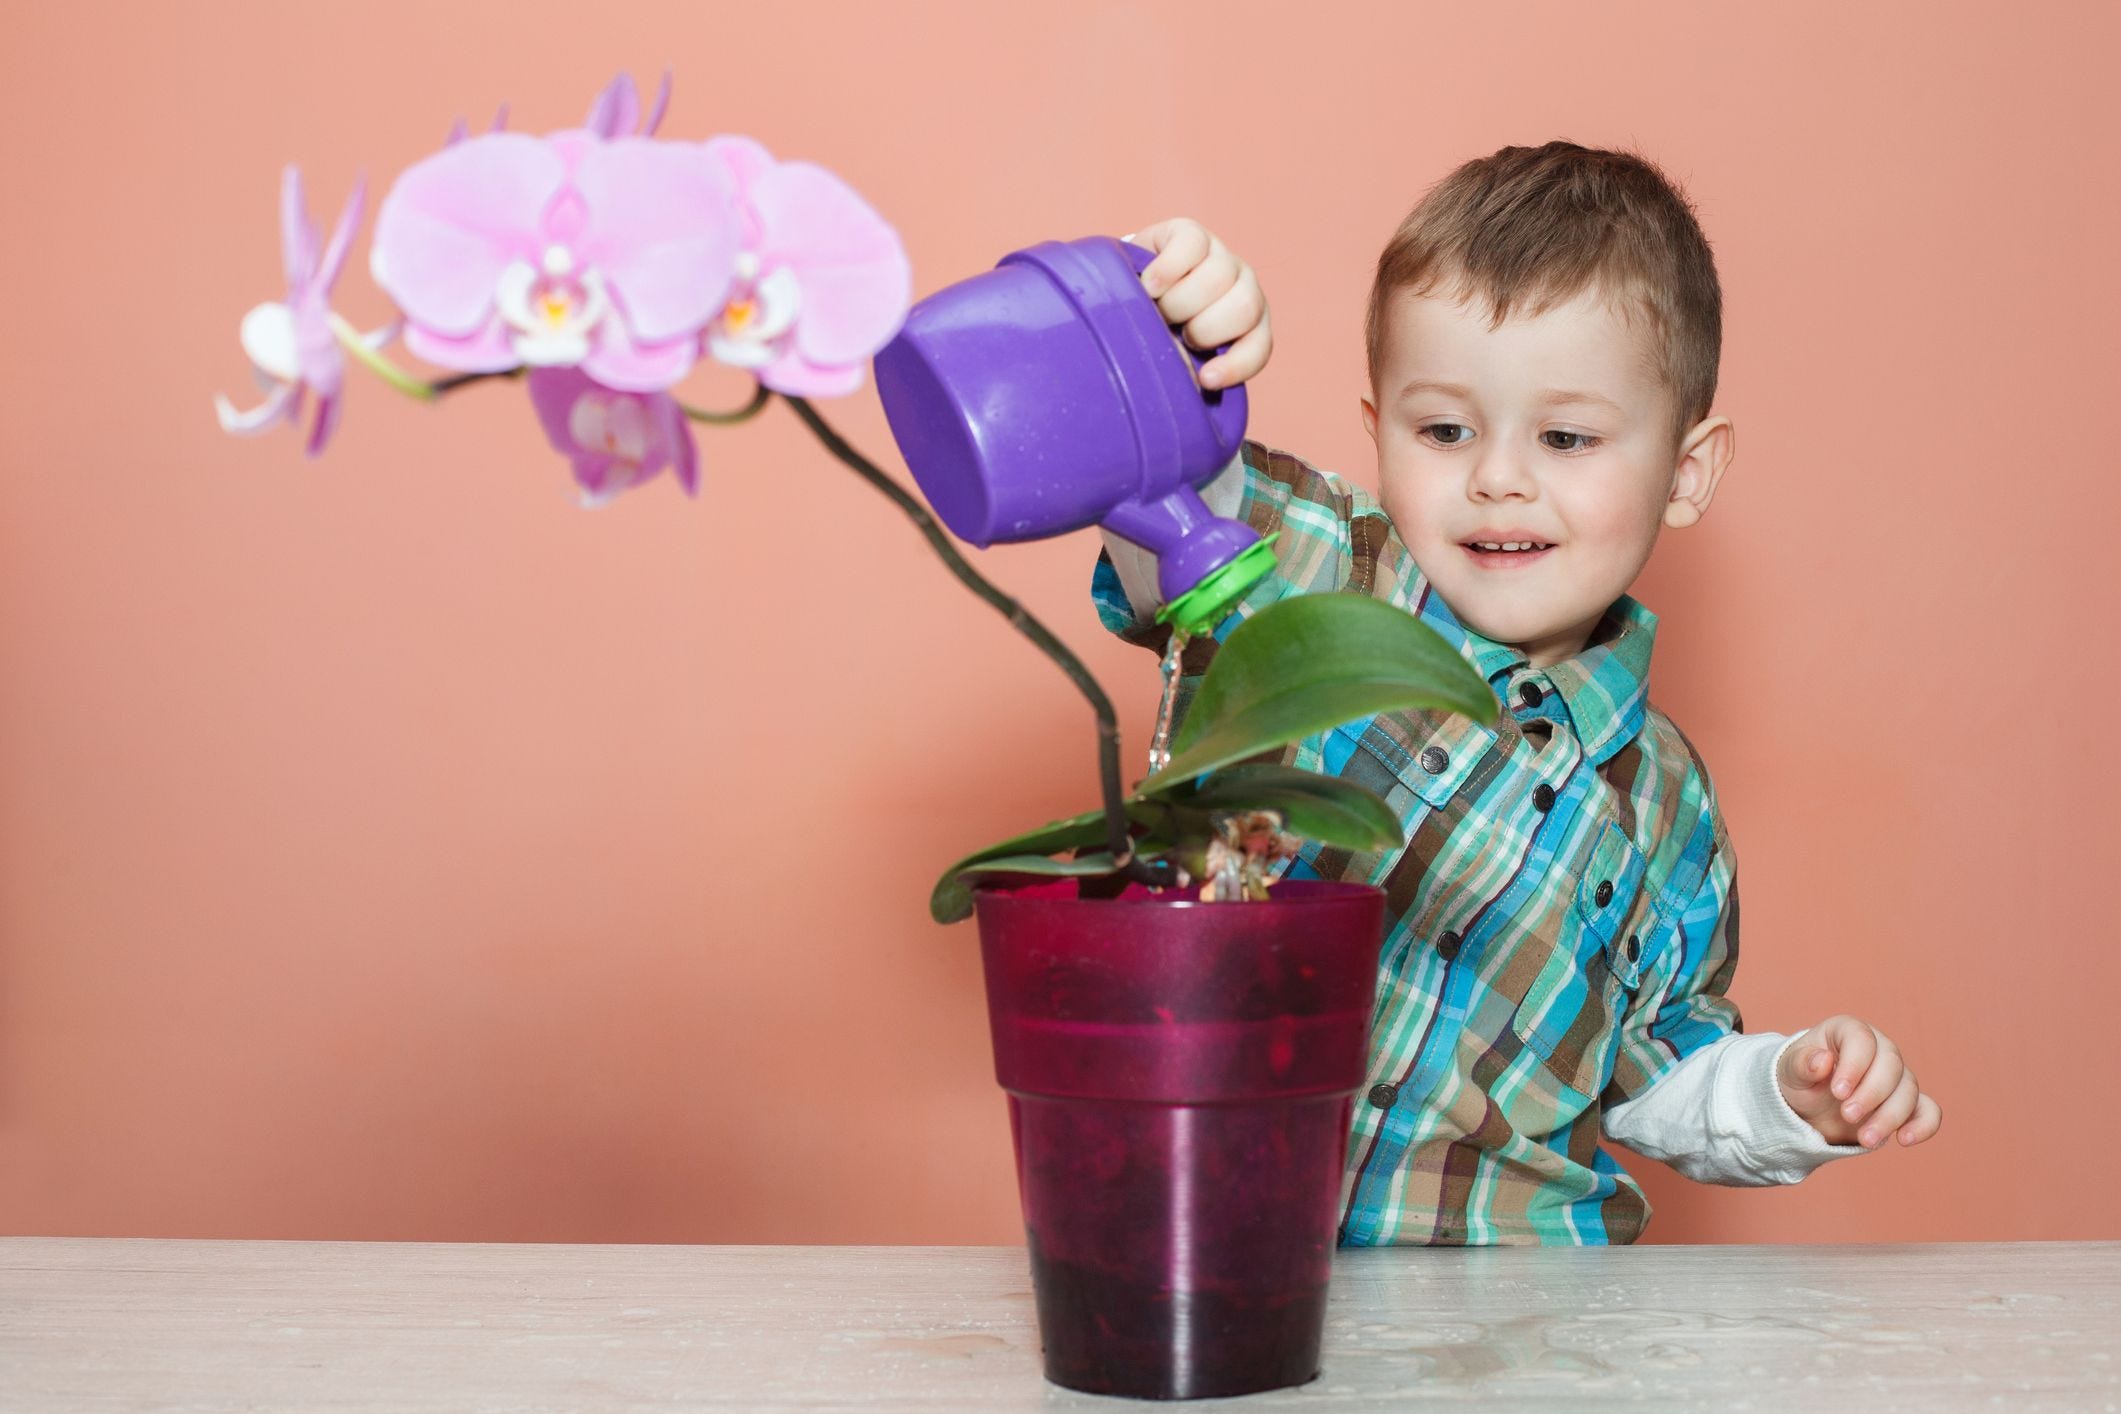 is your kid a dandelion or orchid? science helps sensitive kids thrive